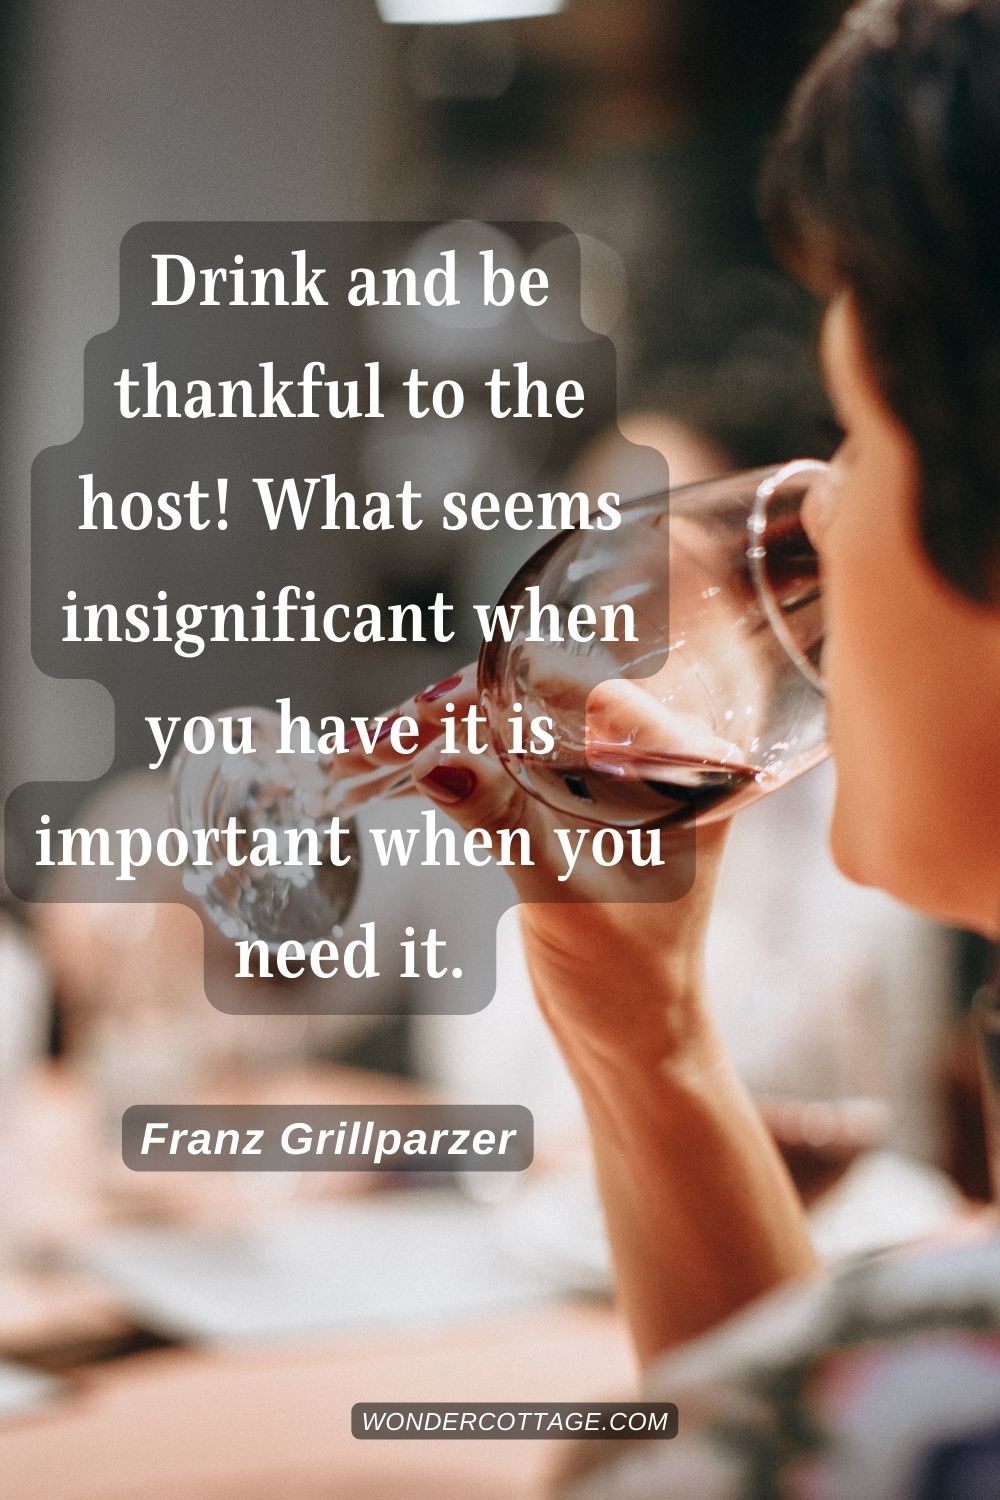 Drink and be thankful to the host! What seems insignificant when you have it is important when you need it. Franz Grillparzer